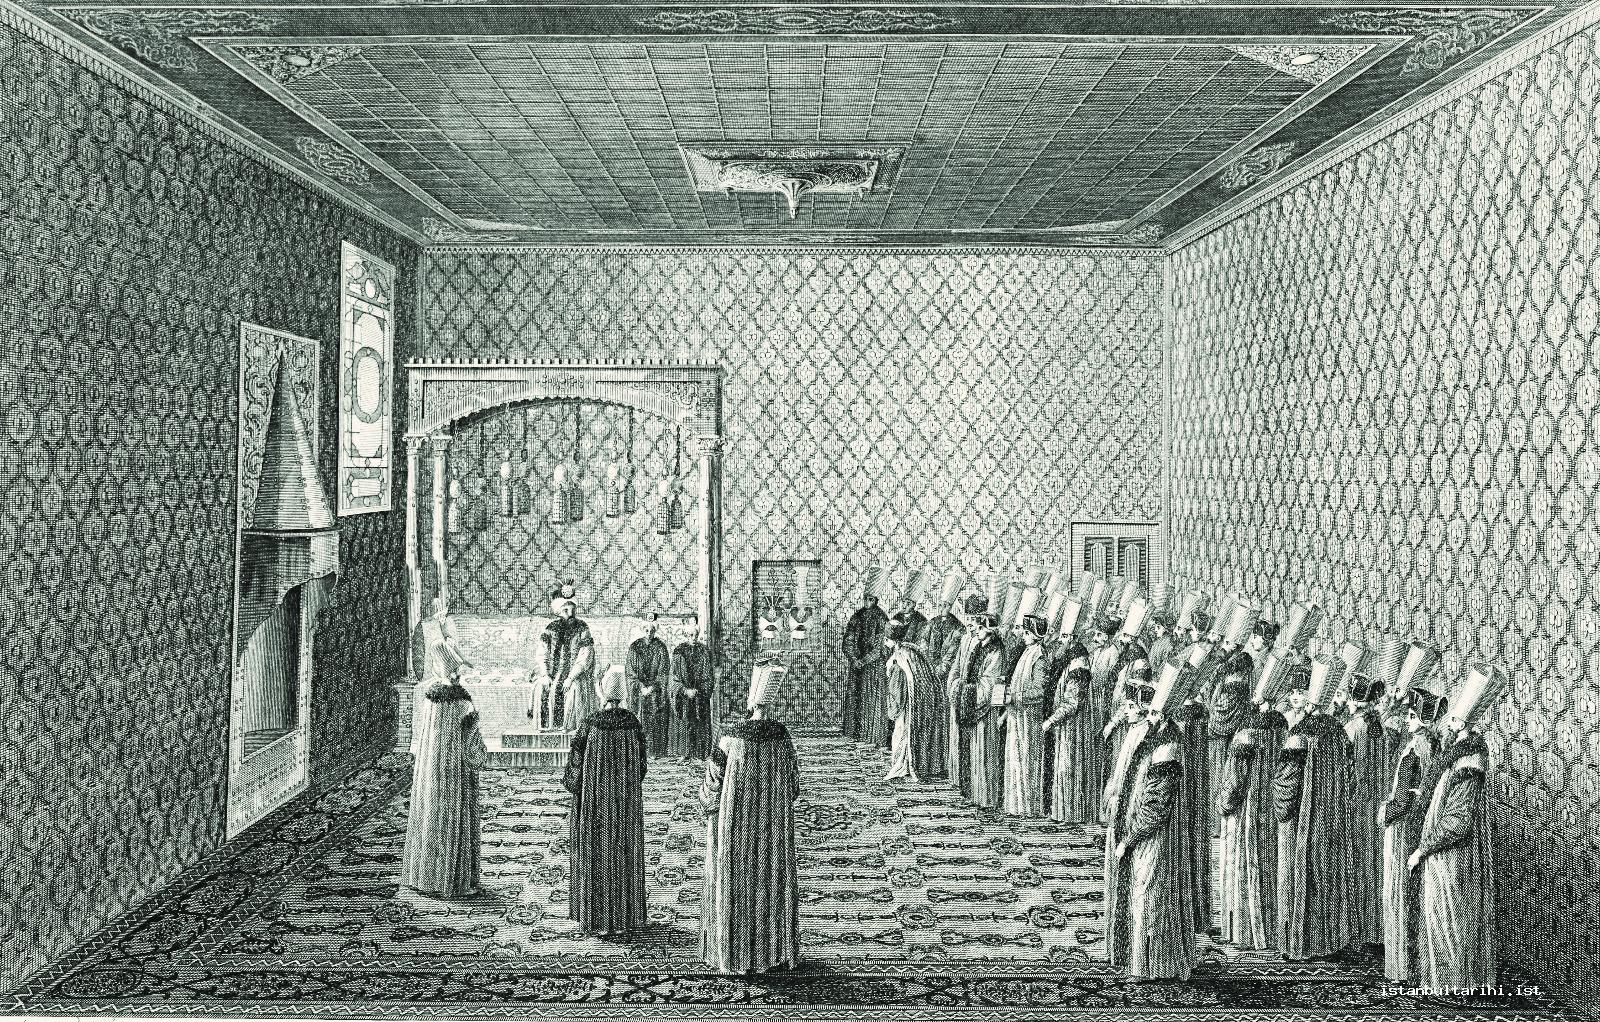 8- Sultan Selim III’s admission of an ambassador in the admission hall (d’Ohsson)